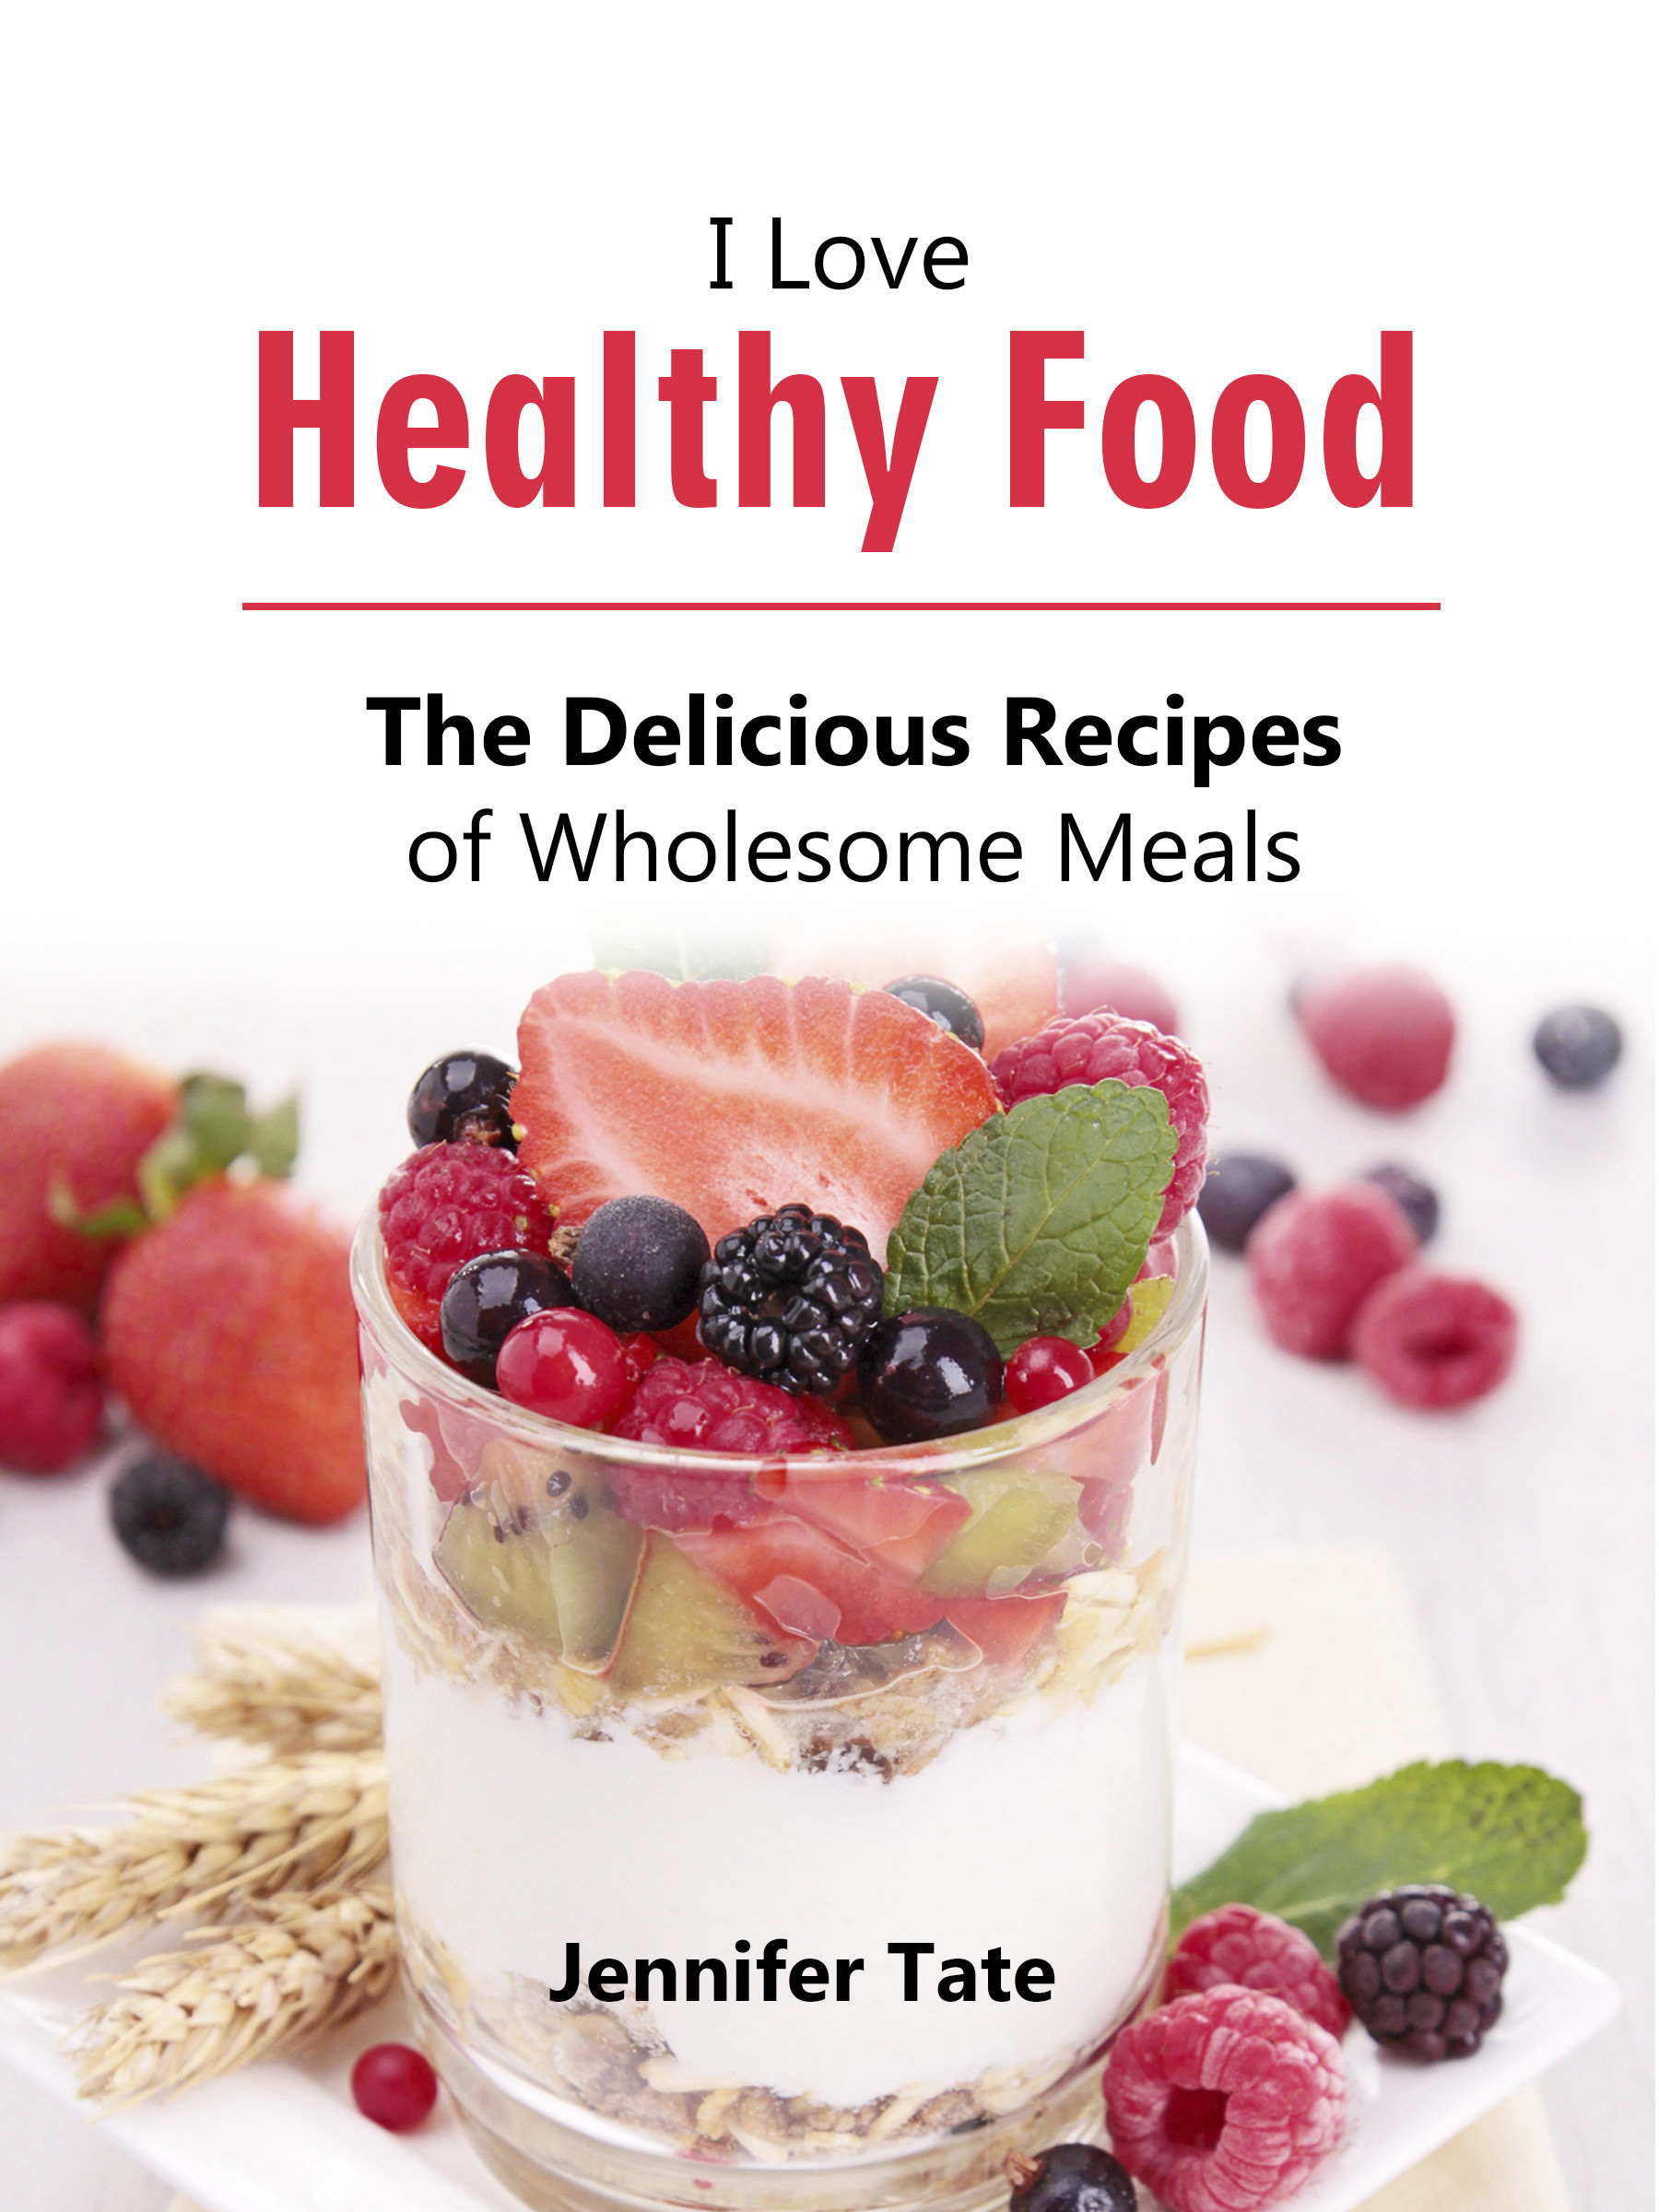 FREE: I Love Healthy Food: The Delicious Recipes of Wholesome Meals by Jennifer Tate